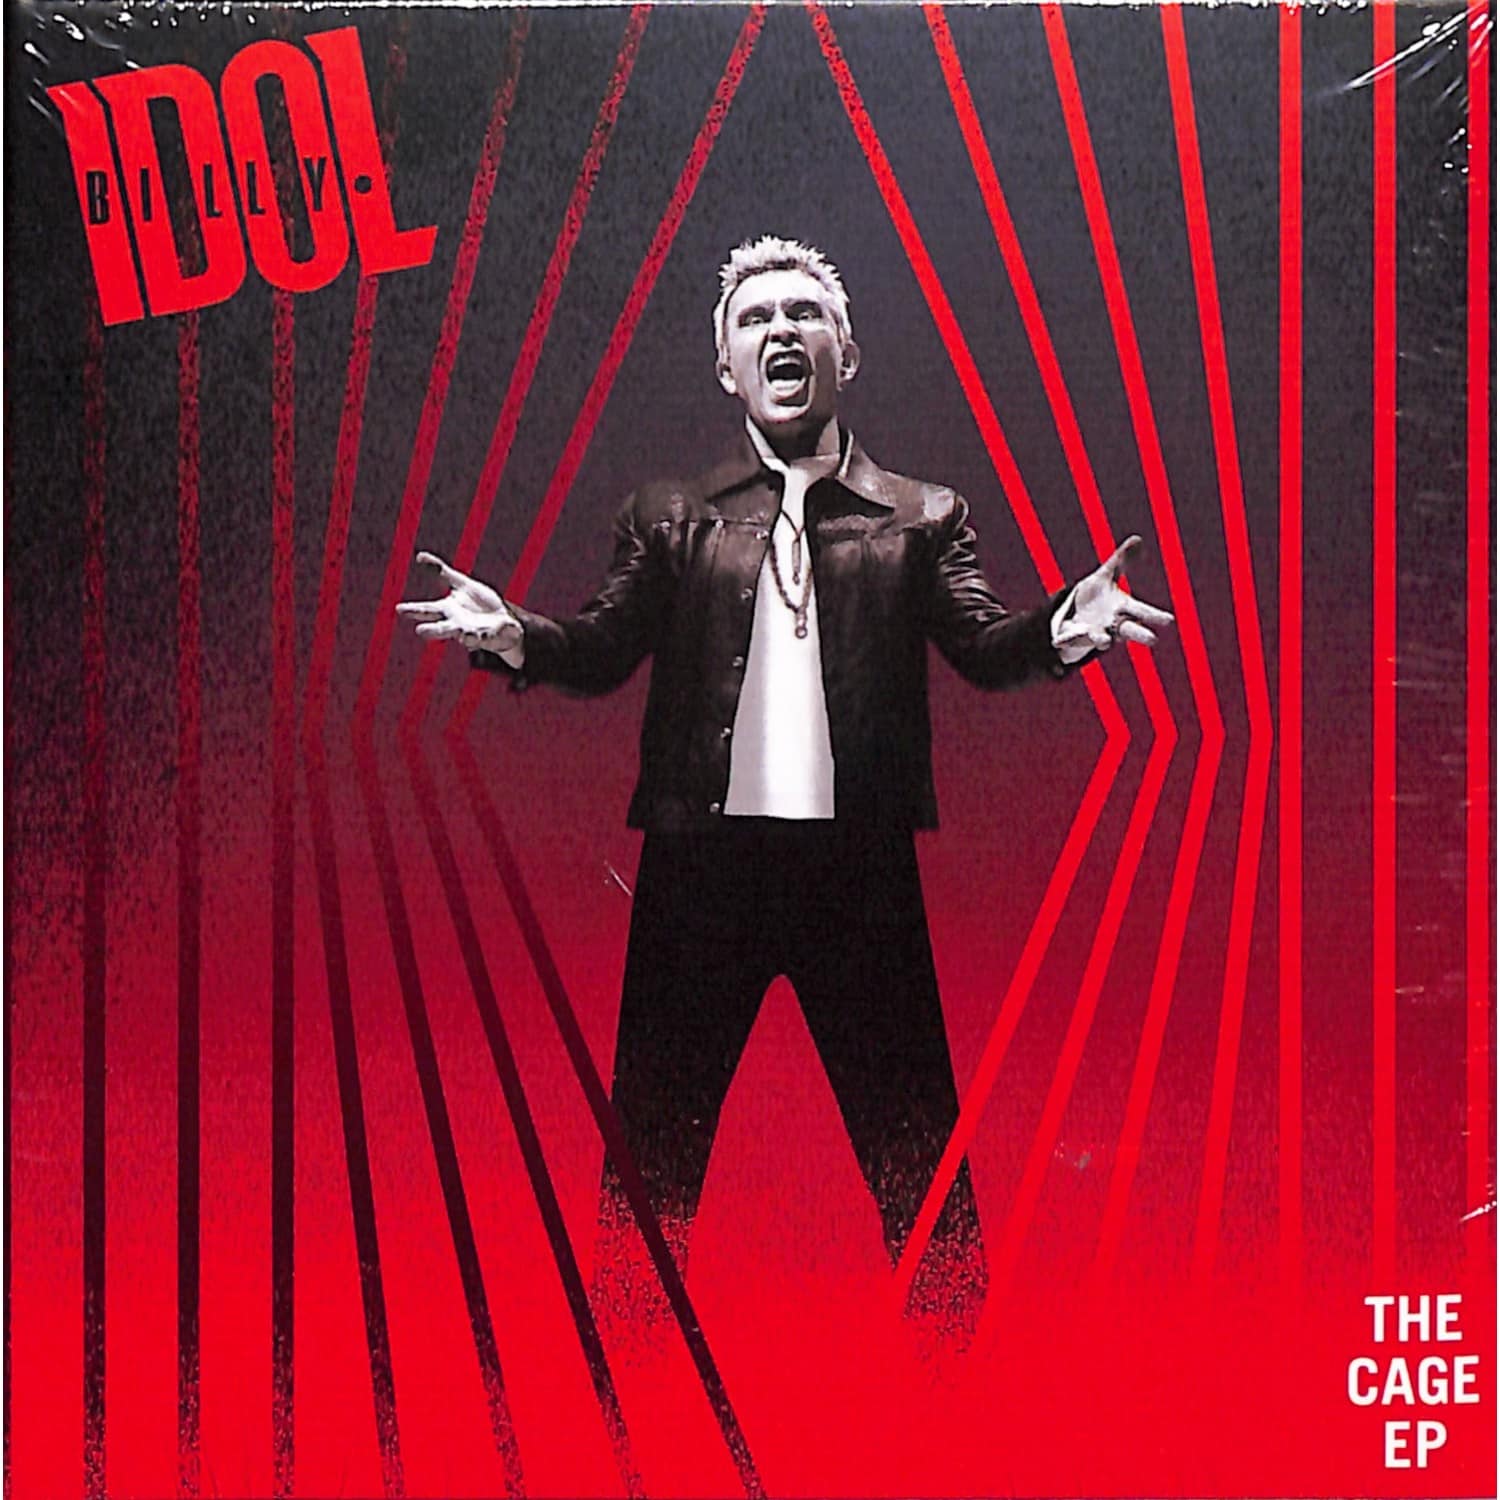 Billy Idol - THE CAGE EP 